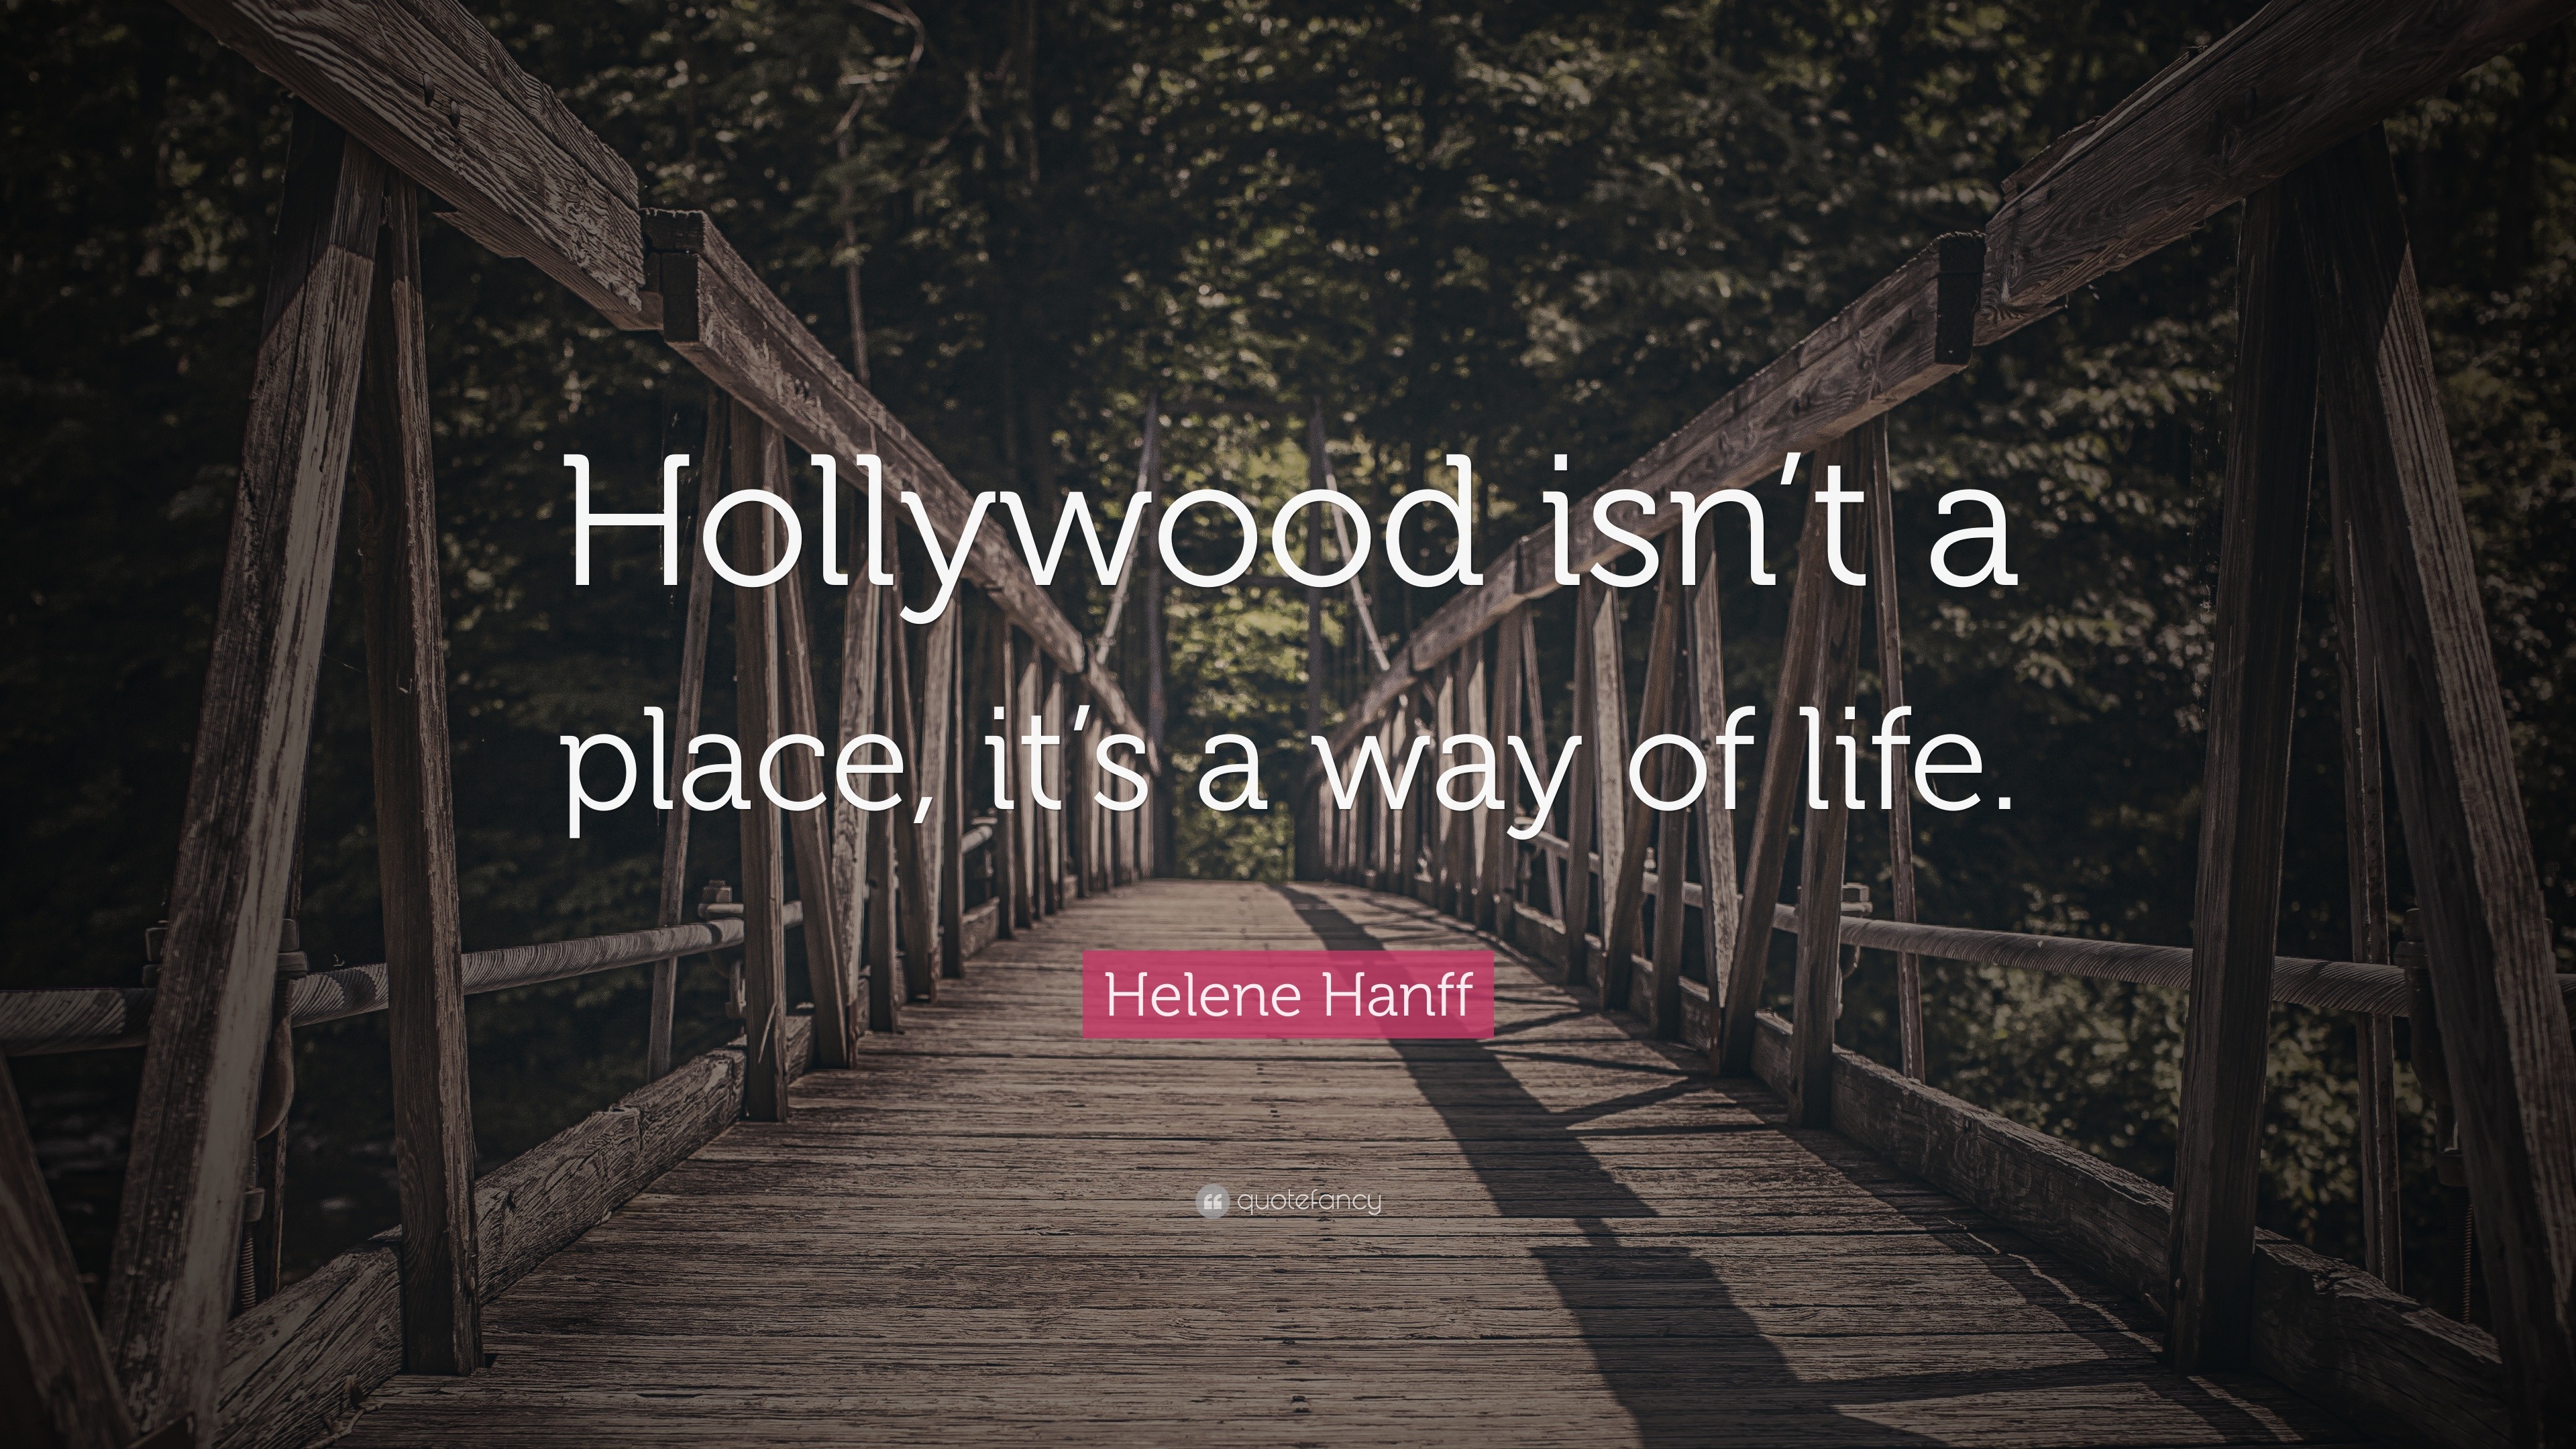 Helene Hanff Quote: “Hollywood isn't a place, it's a way of life.”